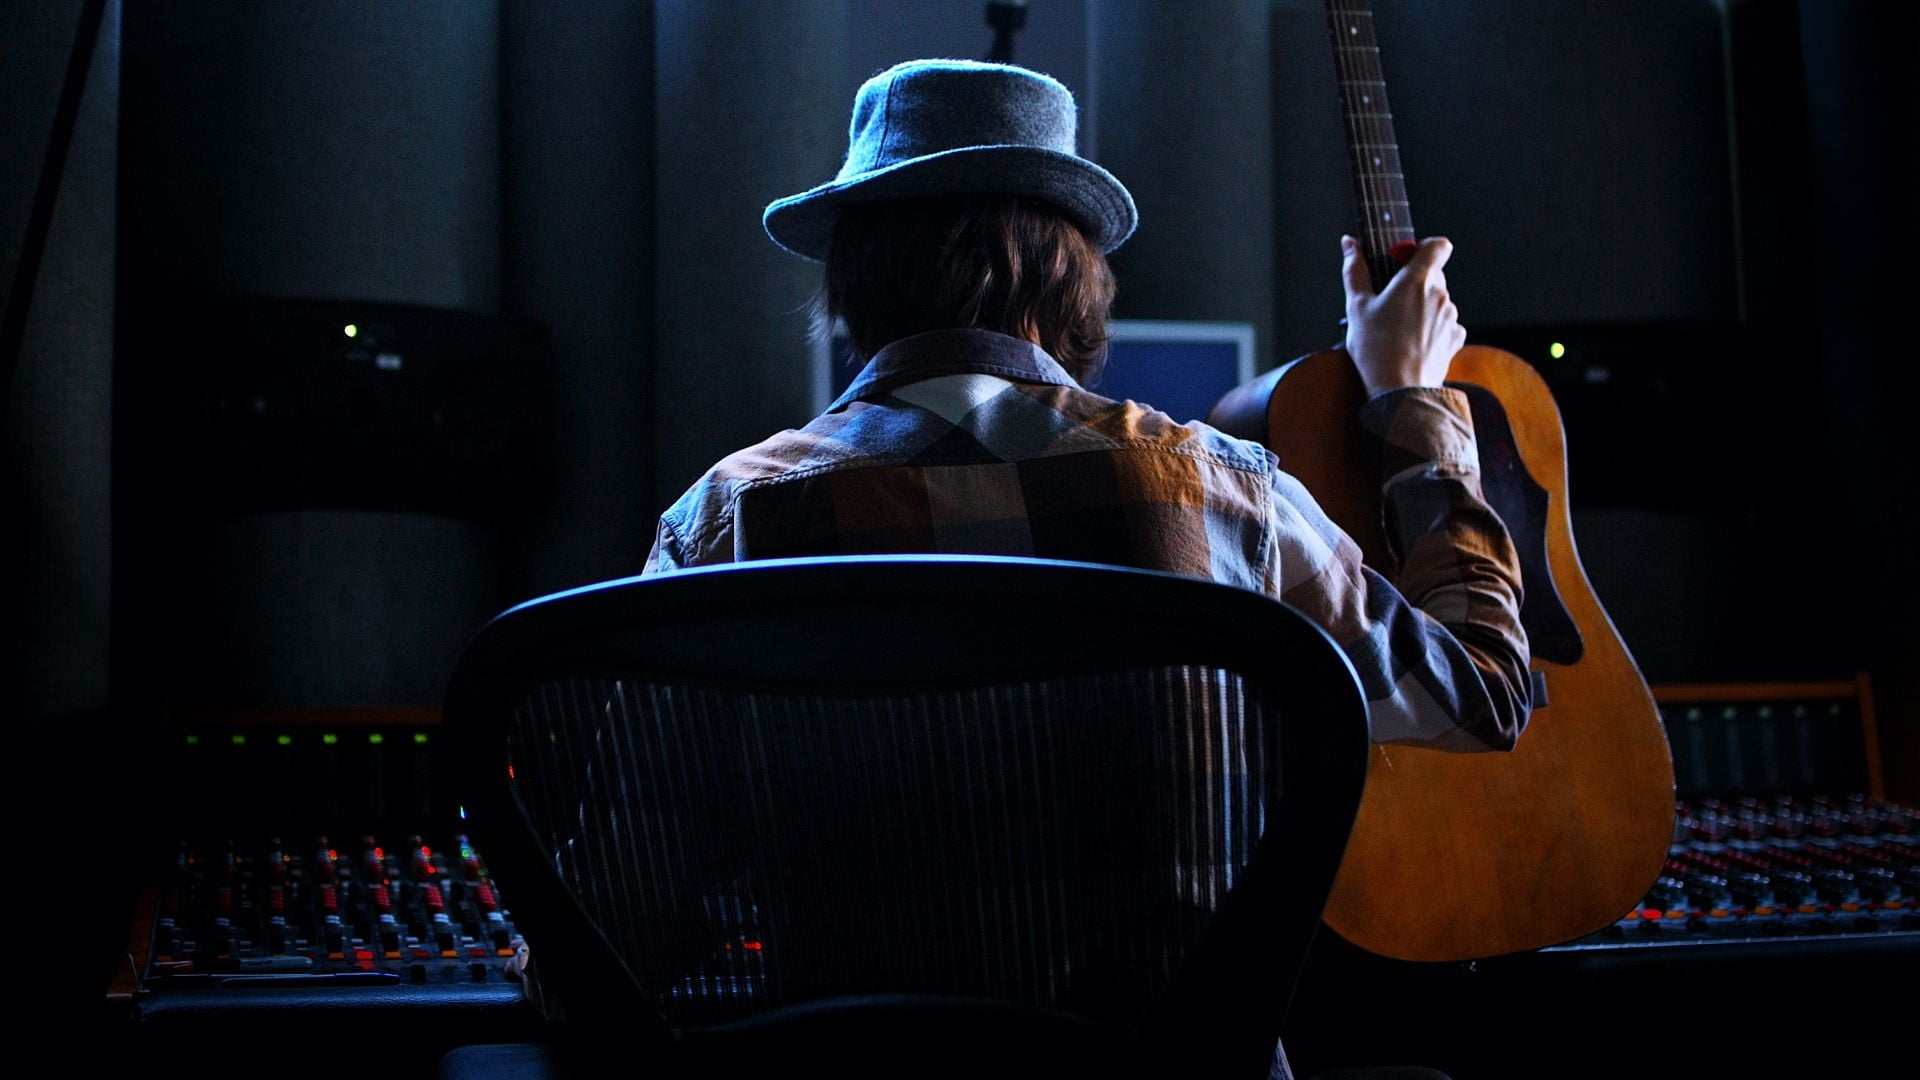 man in blue hat holding guitar while sitting